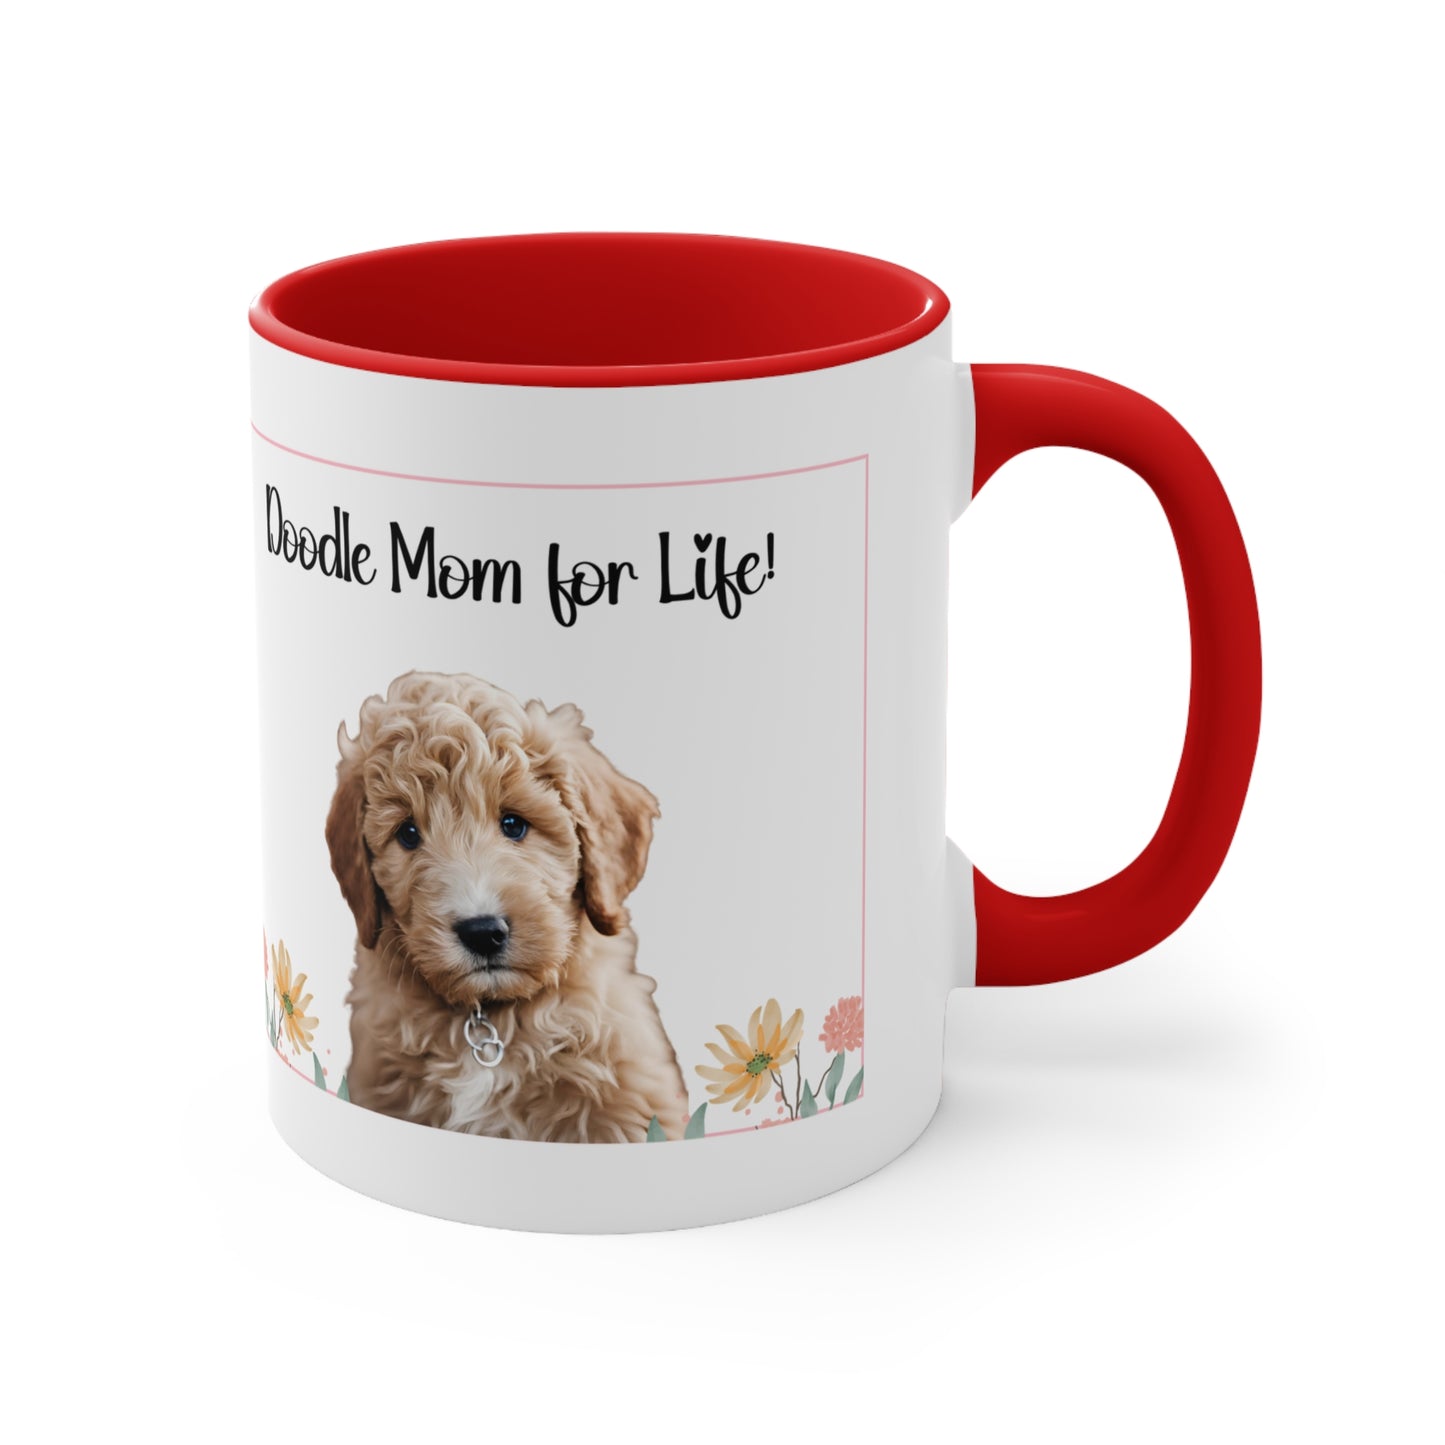 Golden doodle coffee mug, 11 oz hor gift or self, front view in red.